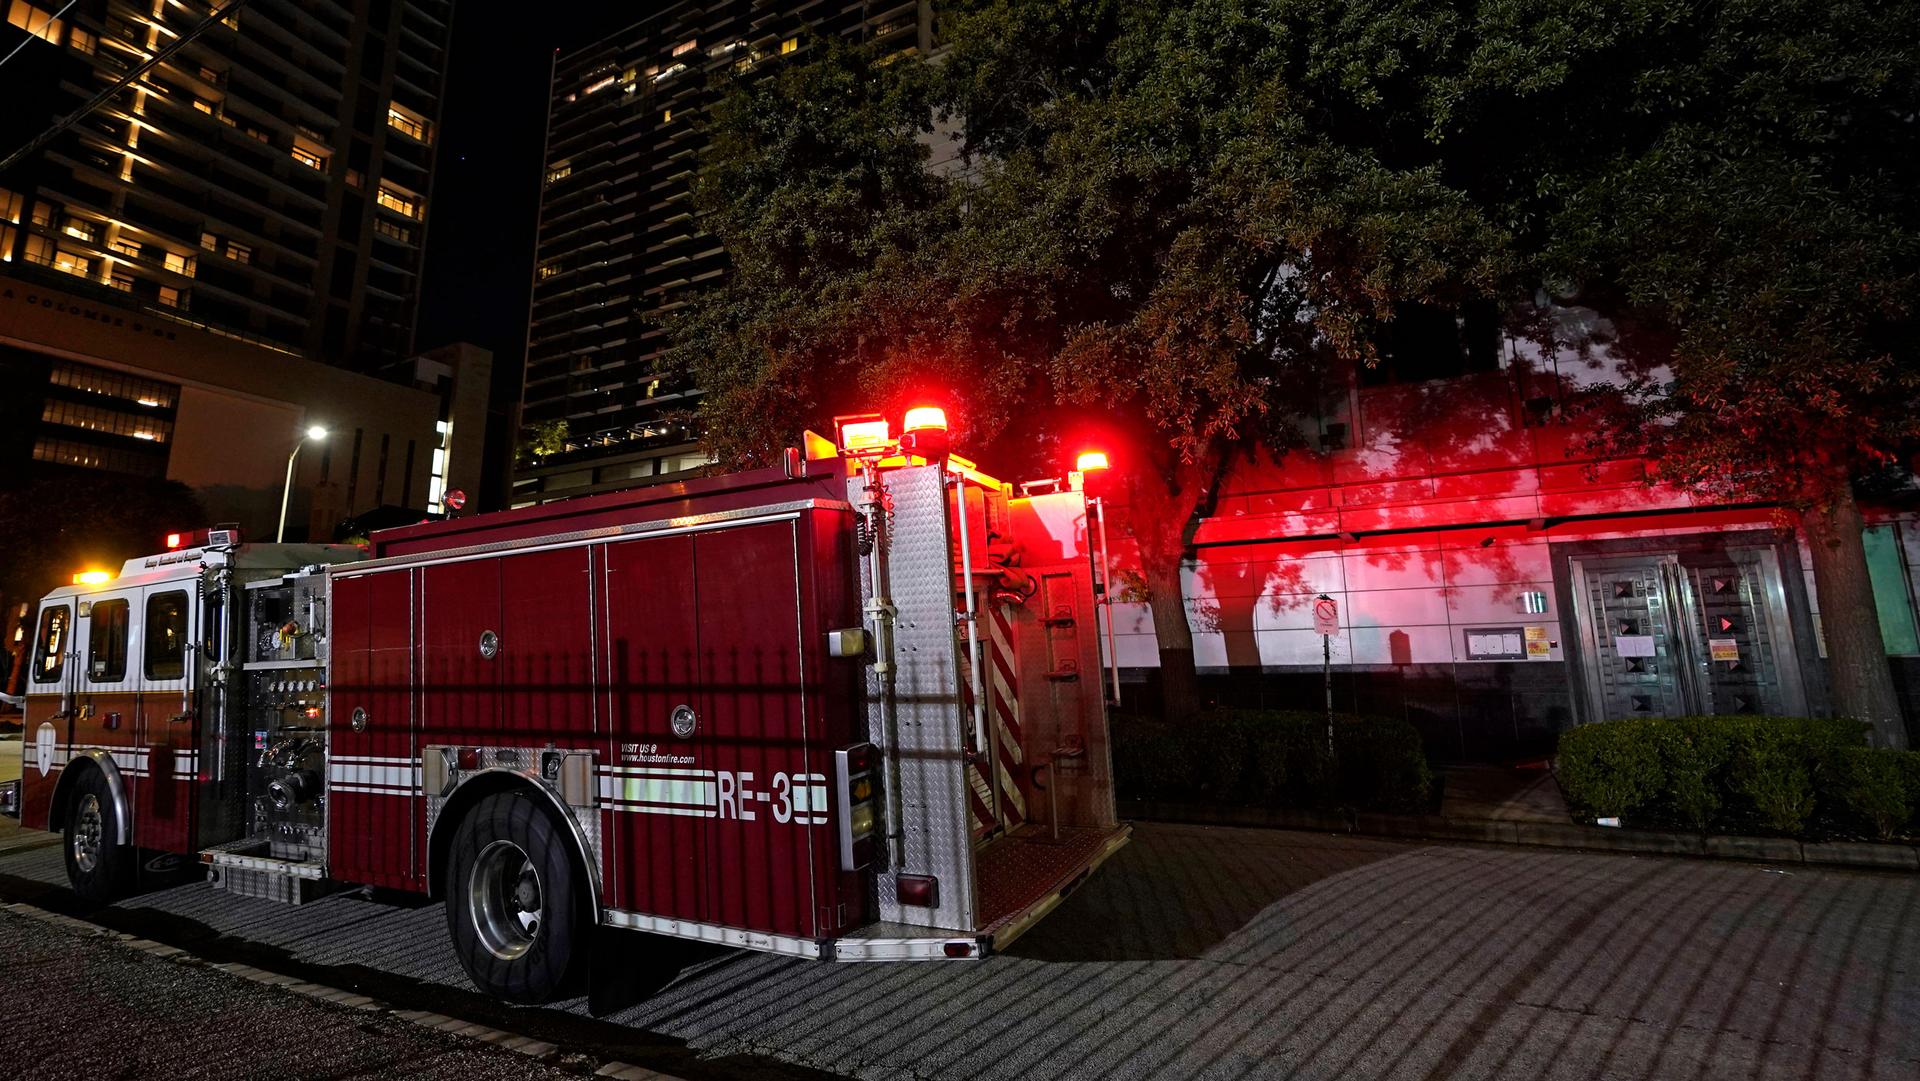 The rear of a red fire truck is shown with lights on outside of a building with trees in the background.